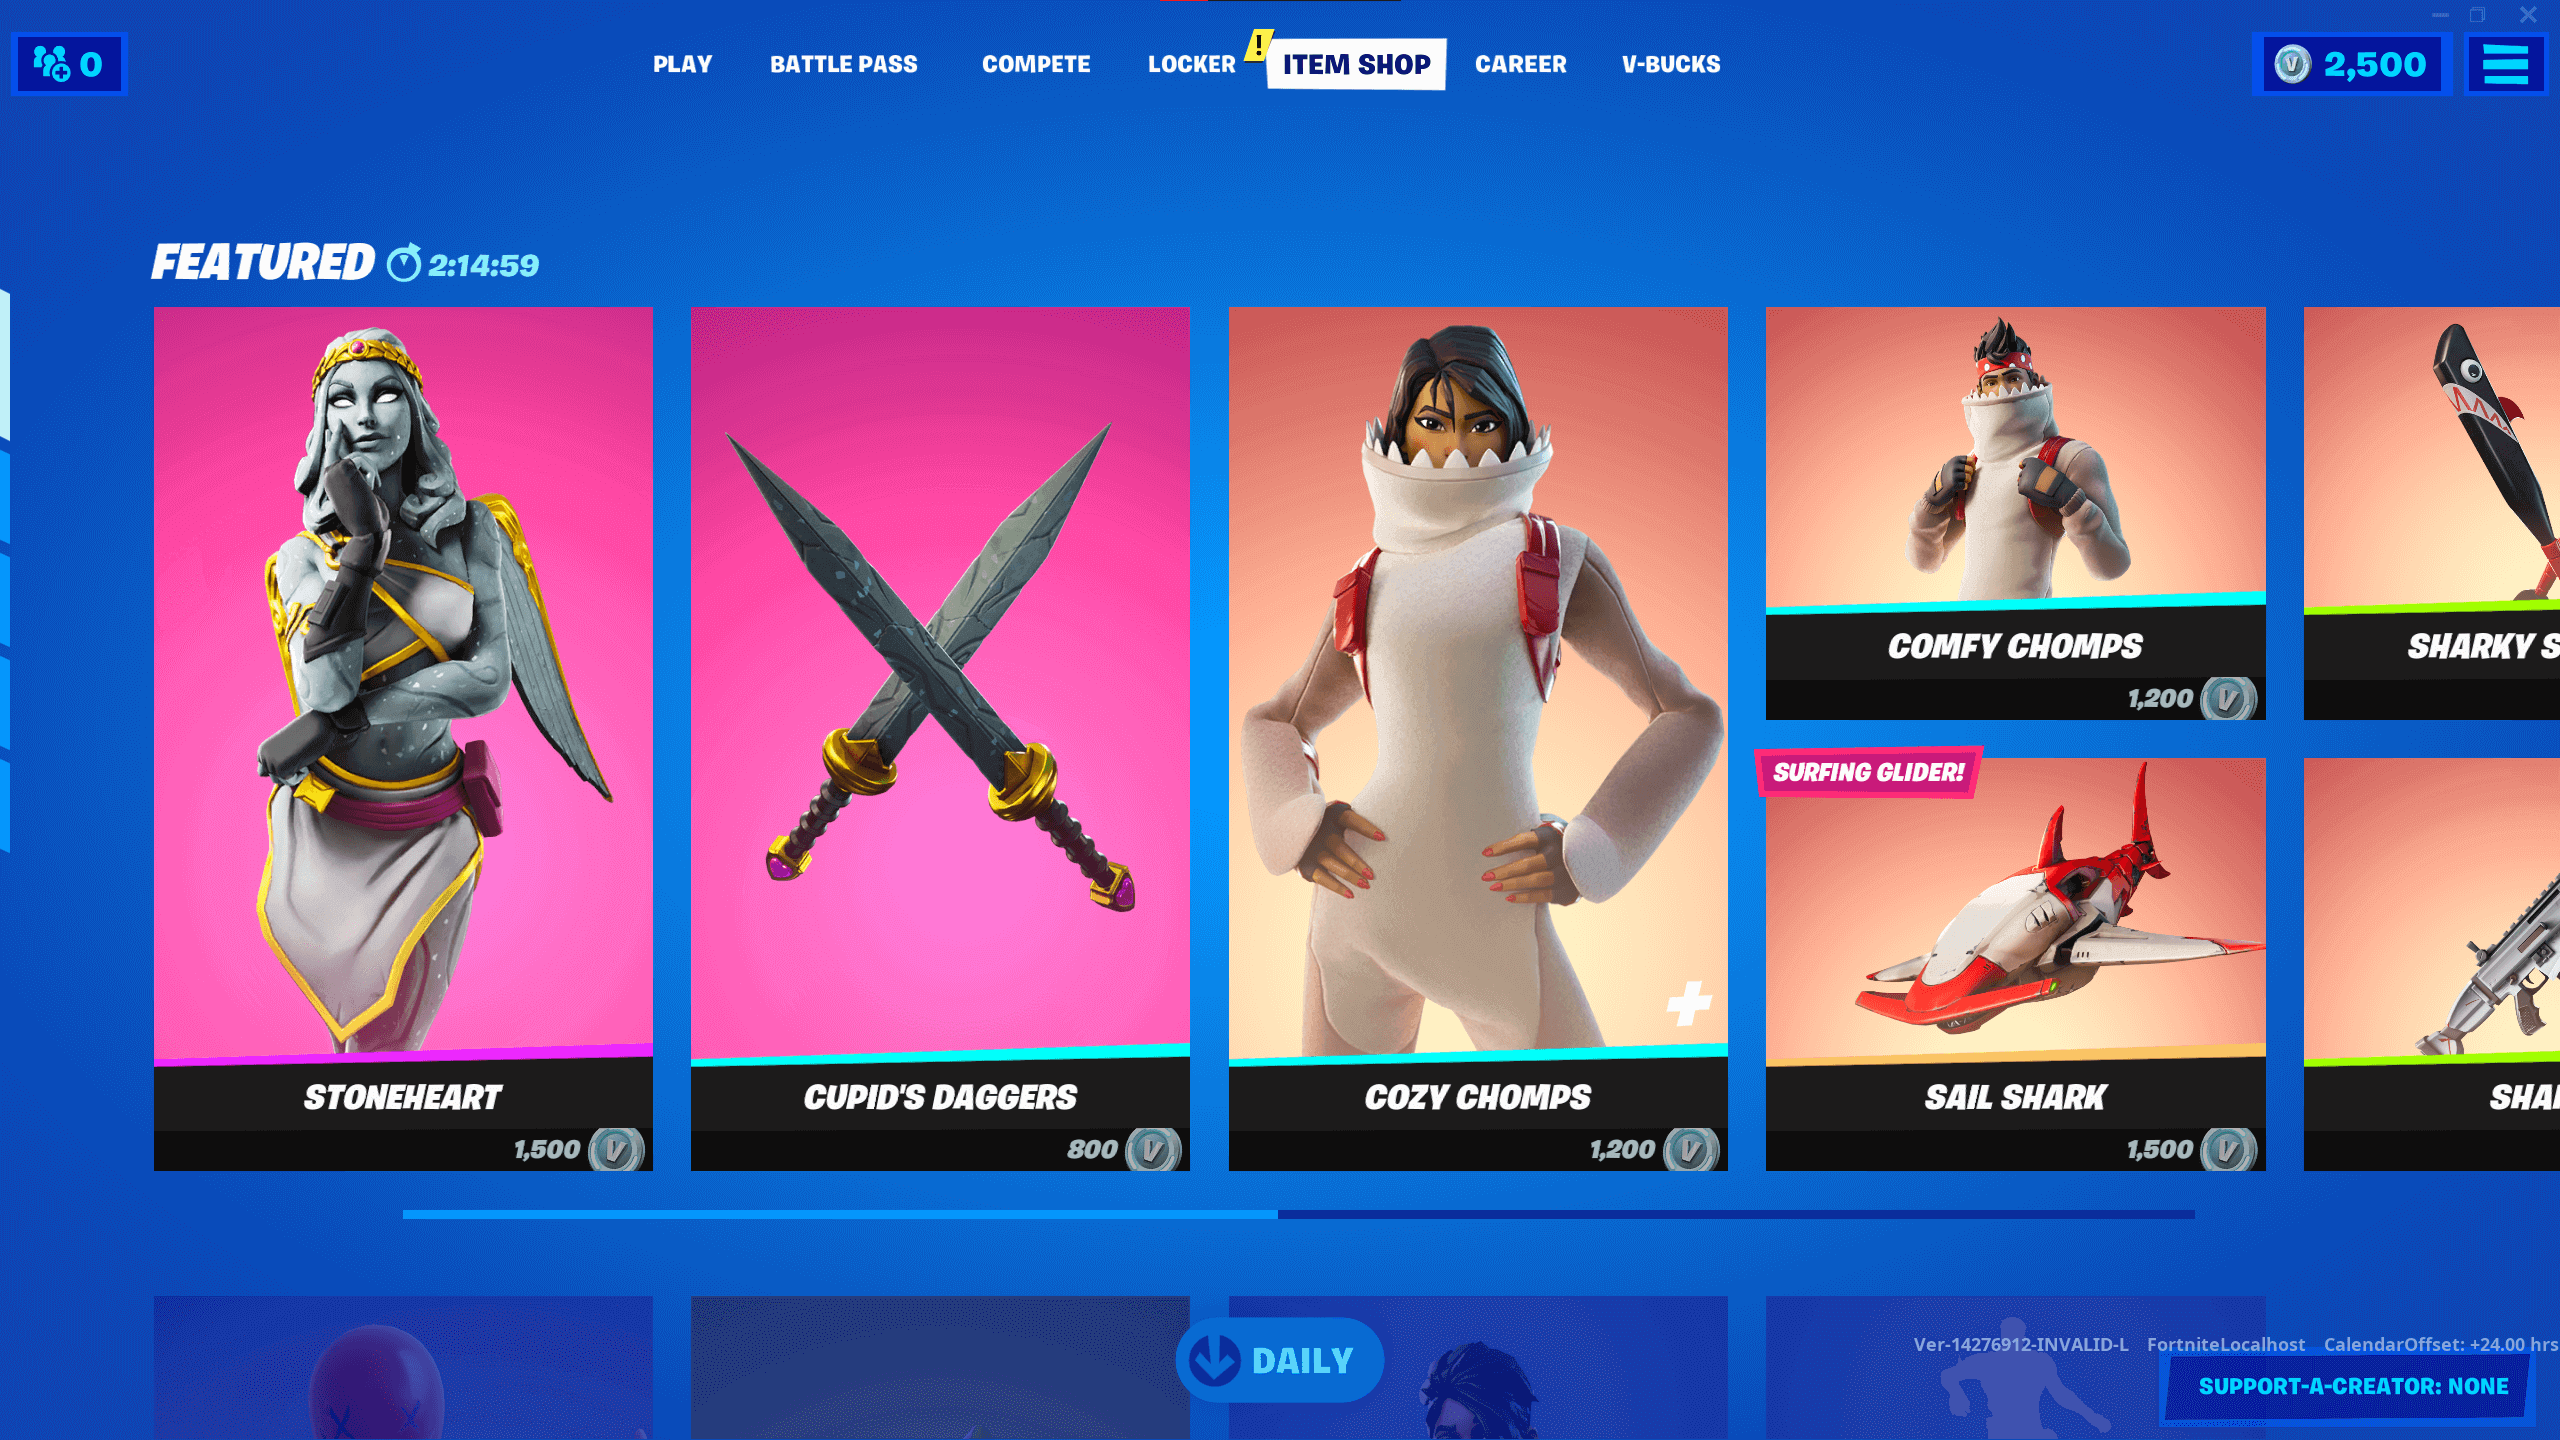 55-hq-pictures-fortnite-upcoming-item-shop-tracker-the-stats-tracker